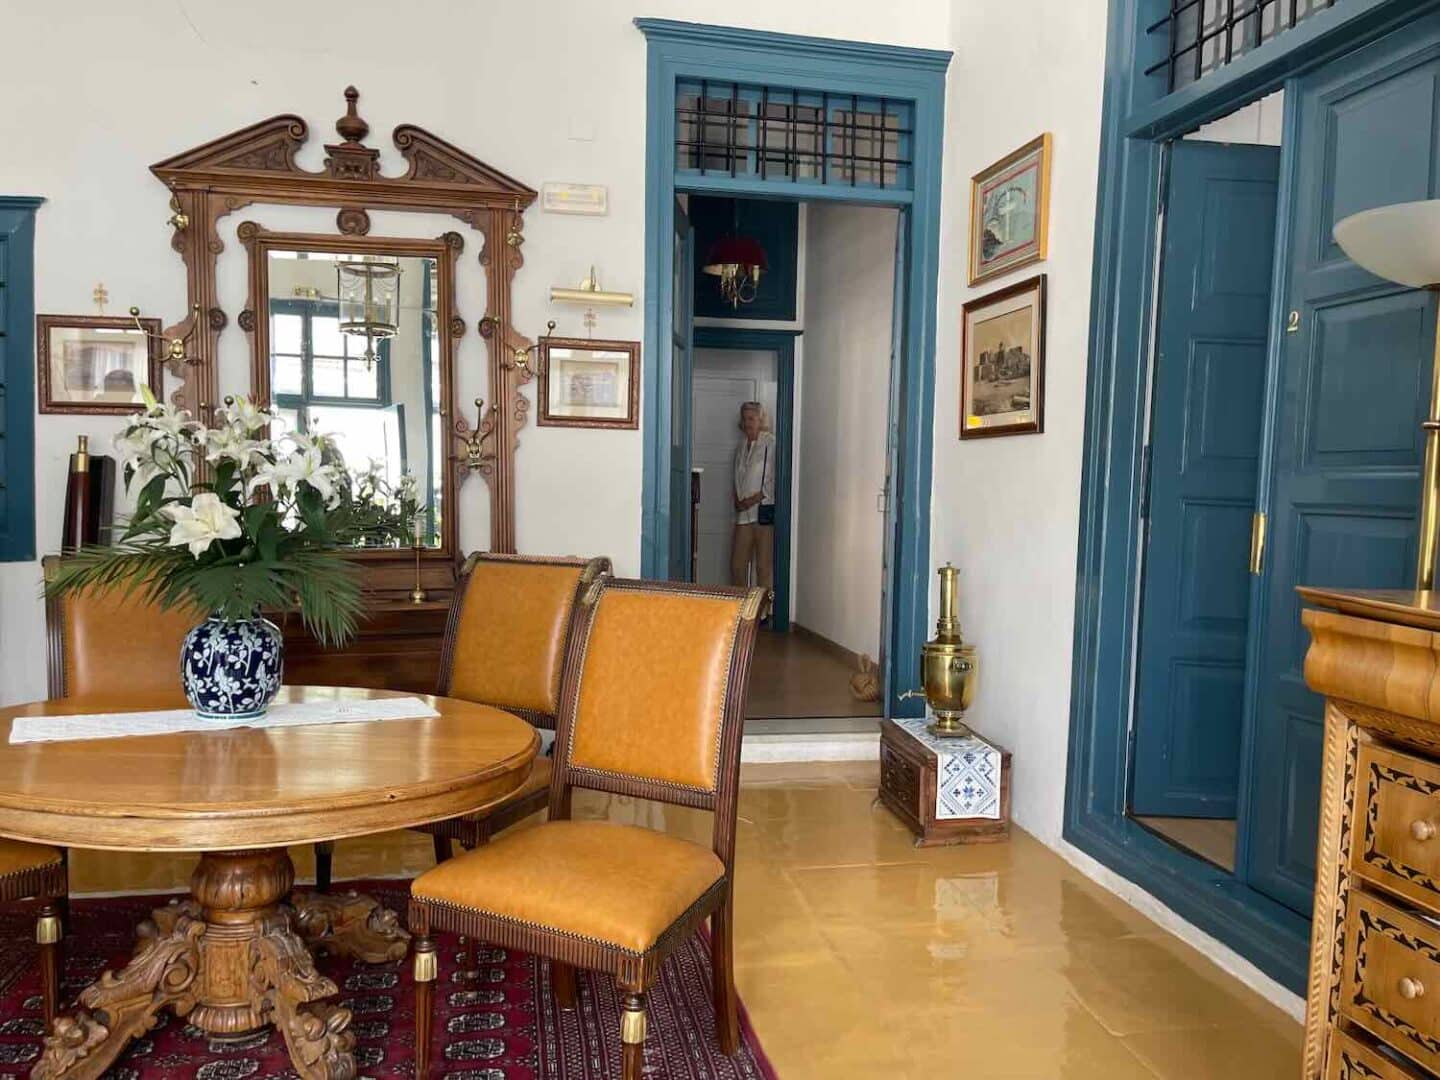 Traditional decor in the Orloff hotel's lobby in Hydra, with ornate wooden furniture and a classic blue and white palette, reflecting Greek heritage.